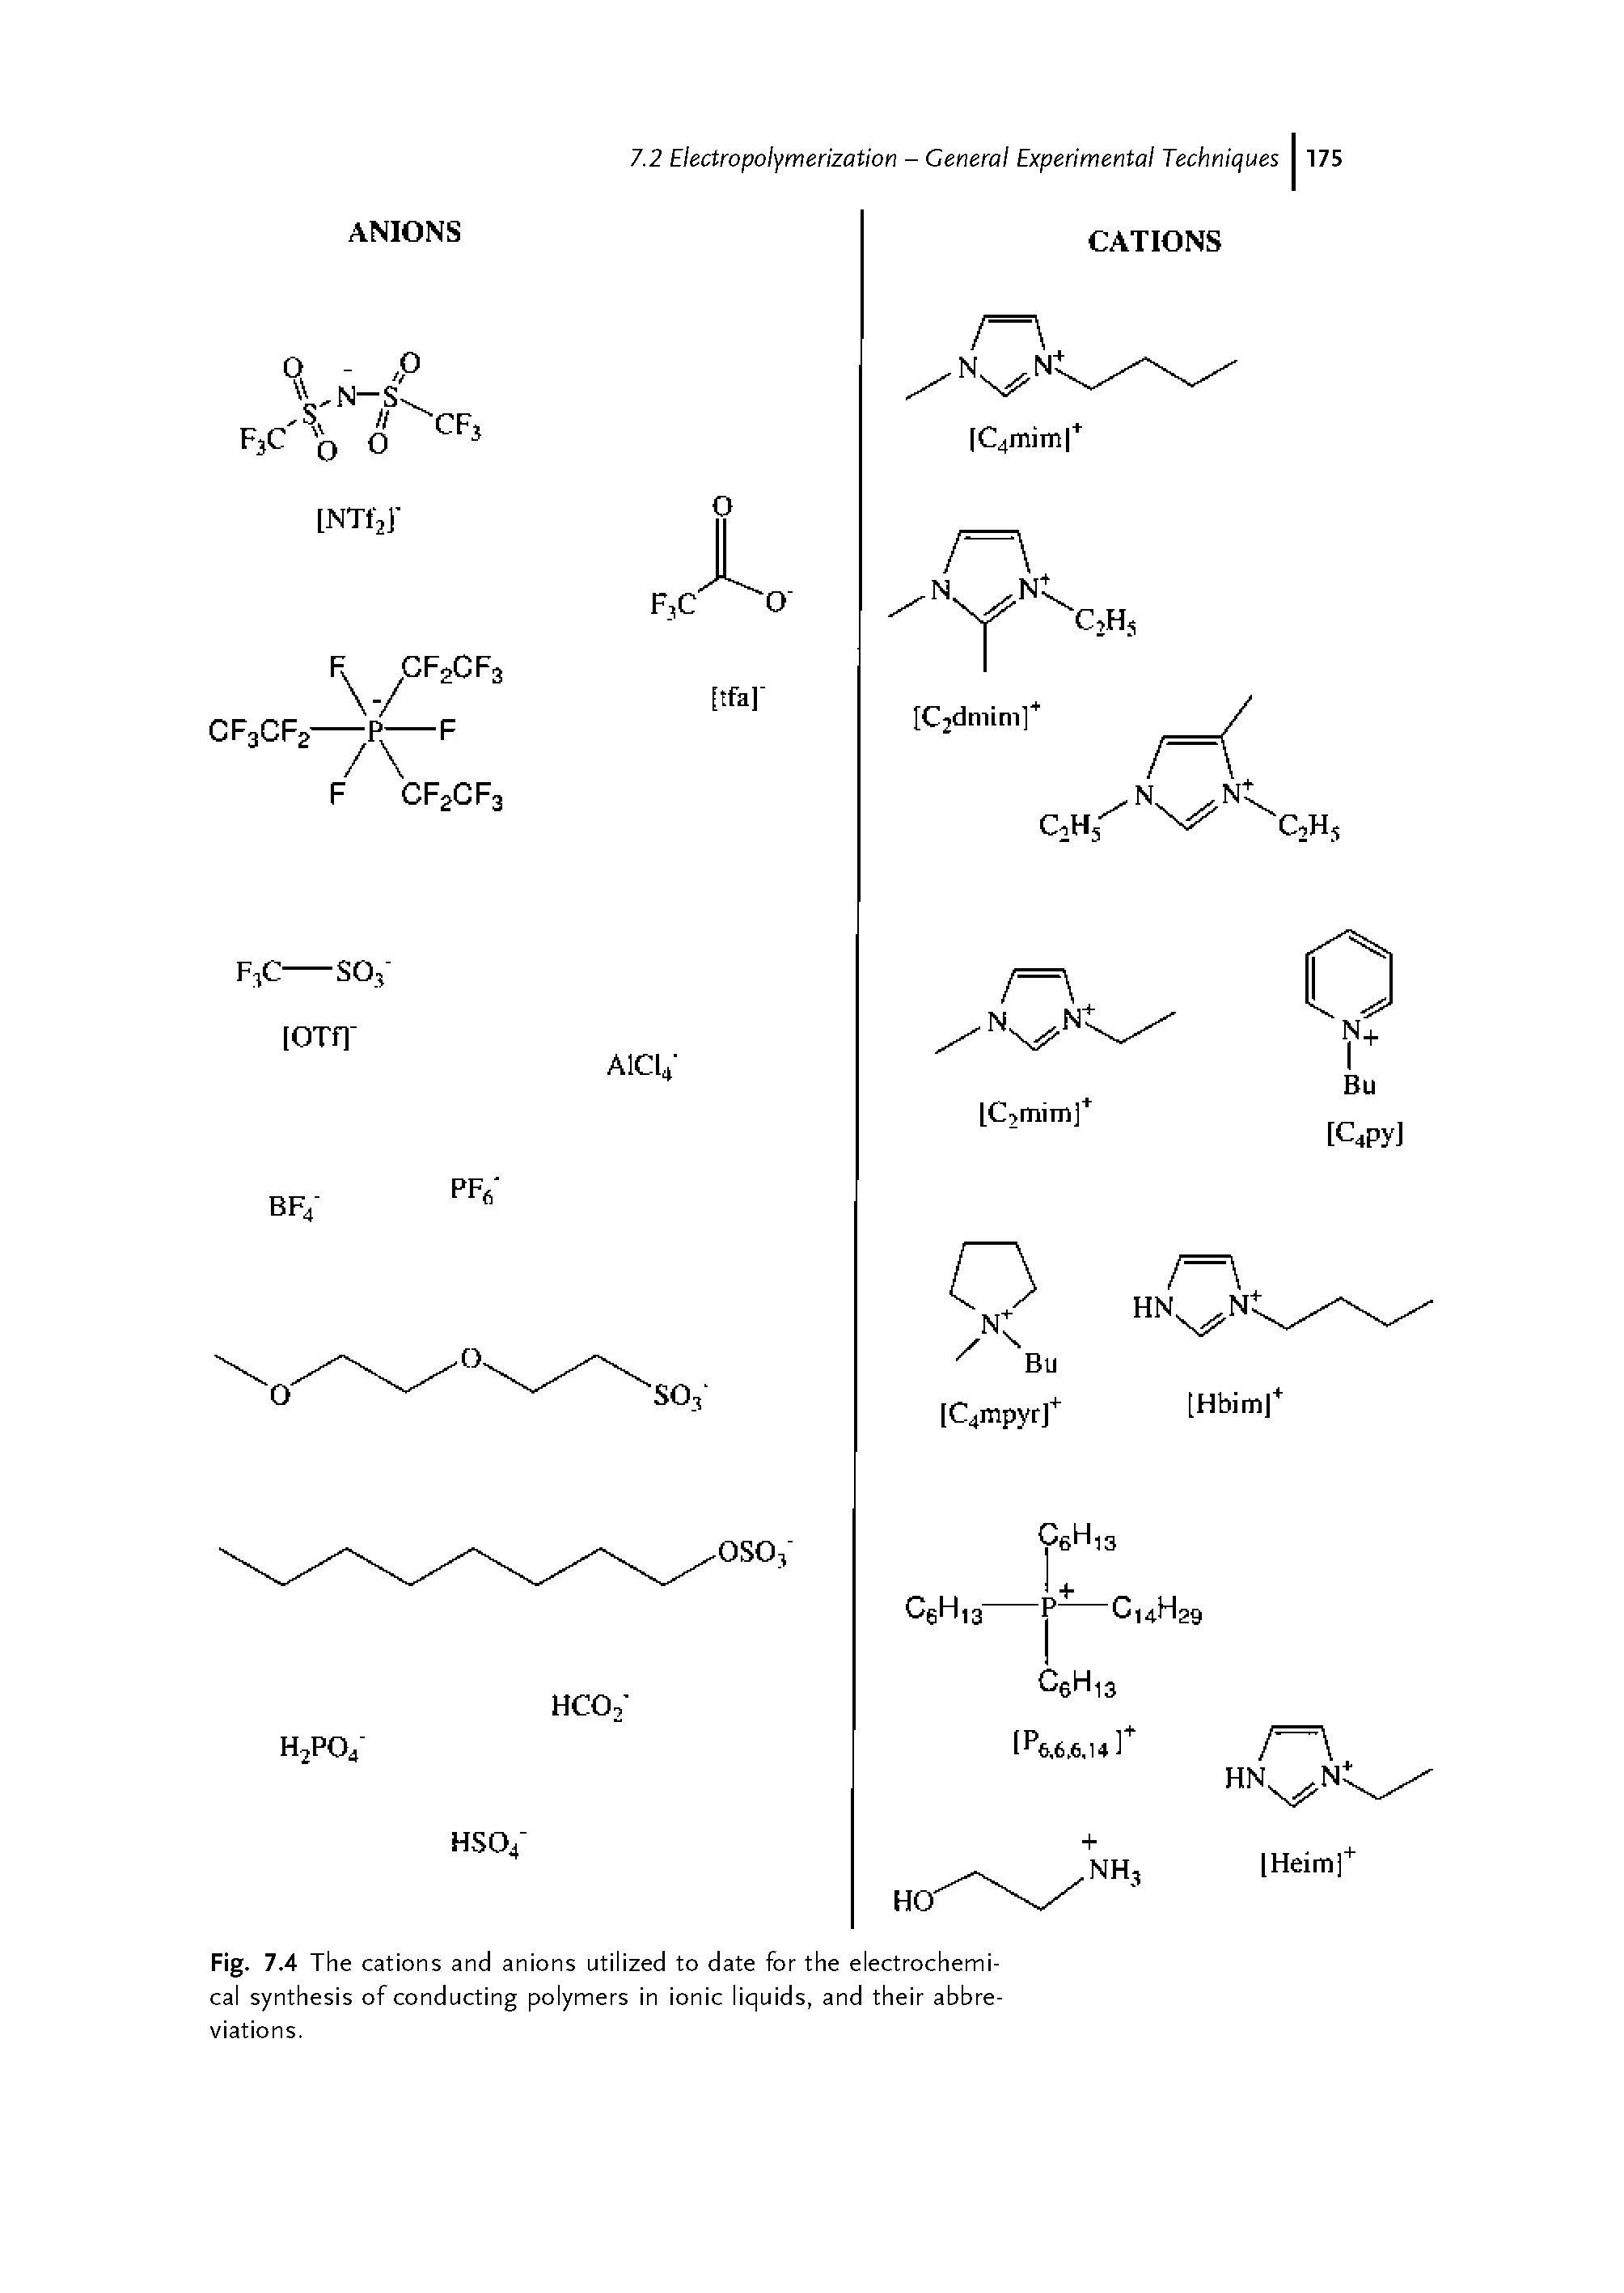 Fig. 7.4 The cations and anions utilized to date for the electrochemical synthesis of conducting polymers in ionic liquids, and their abbreviations.